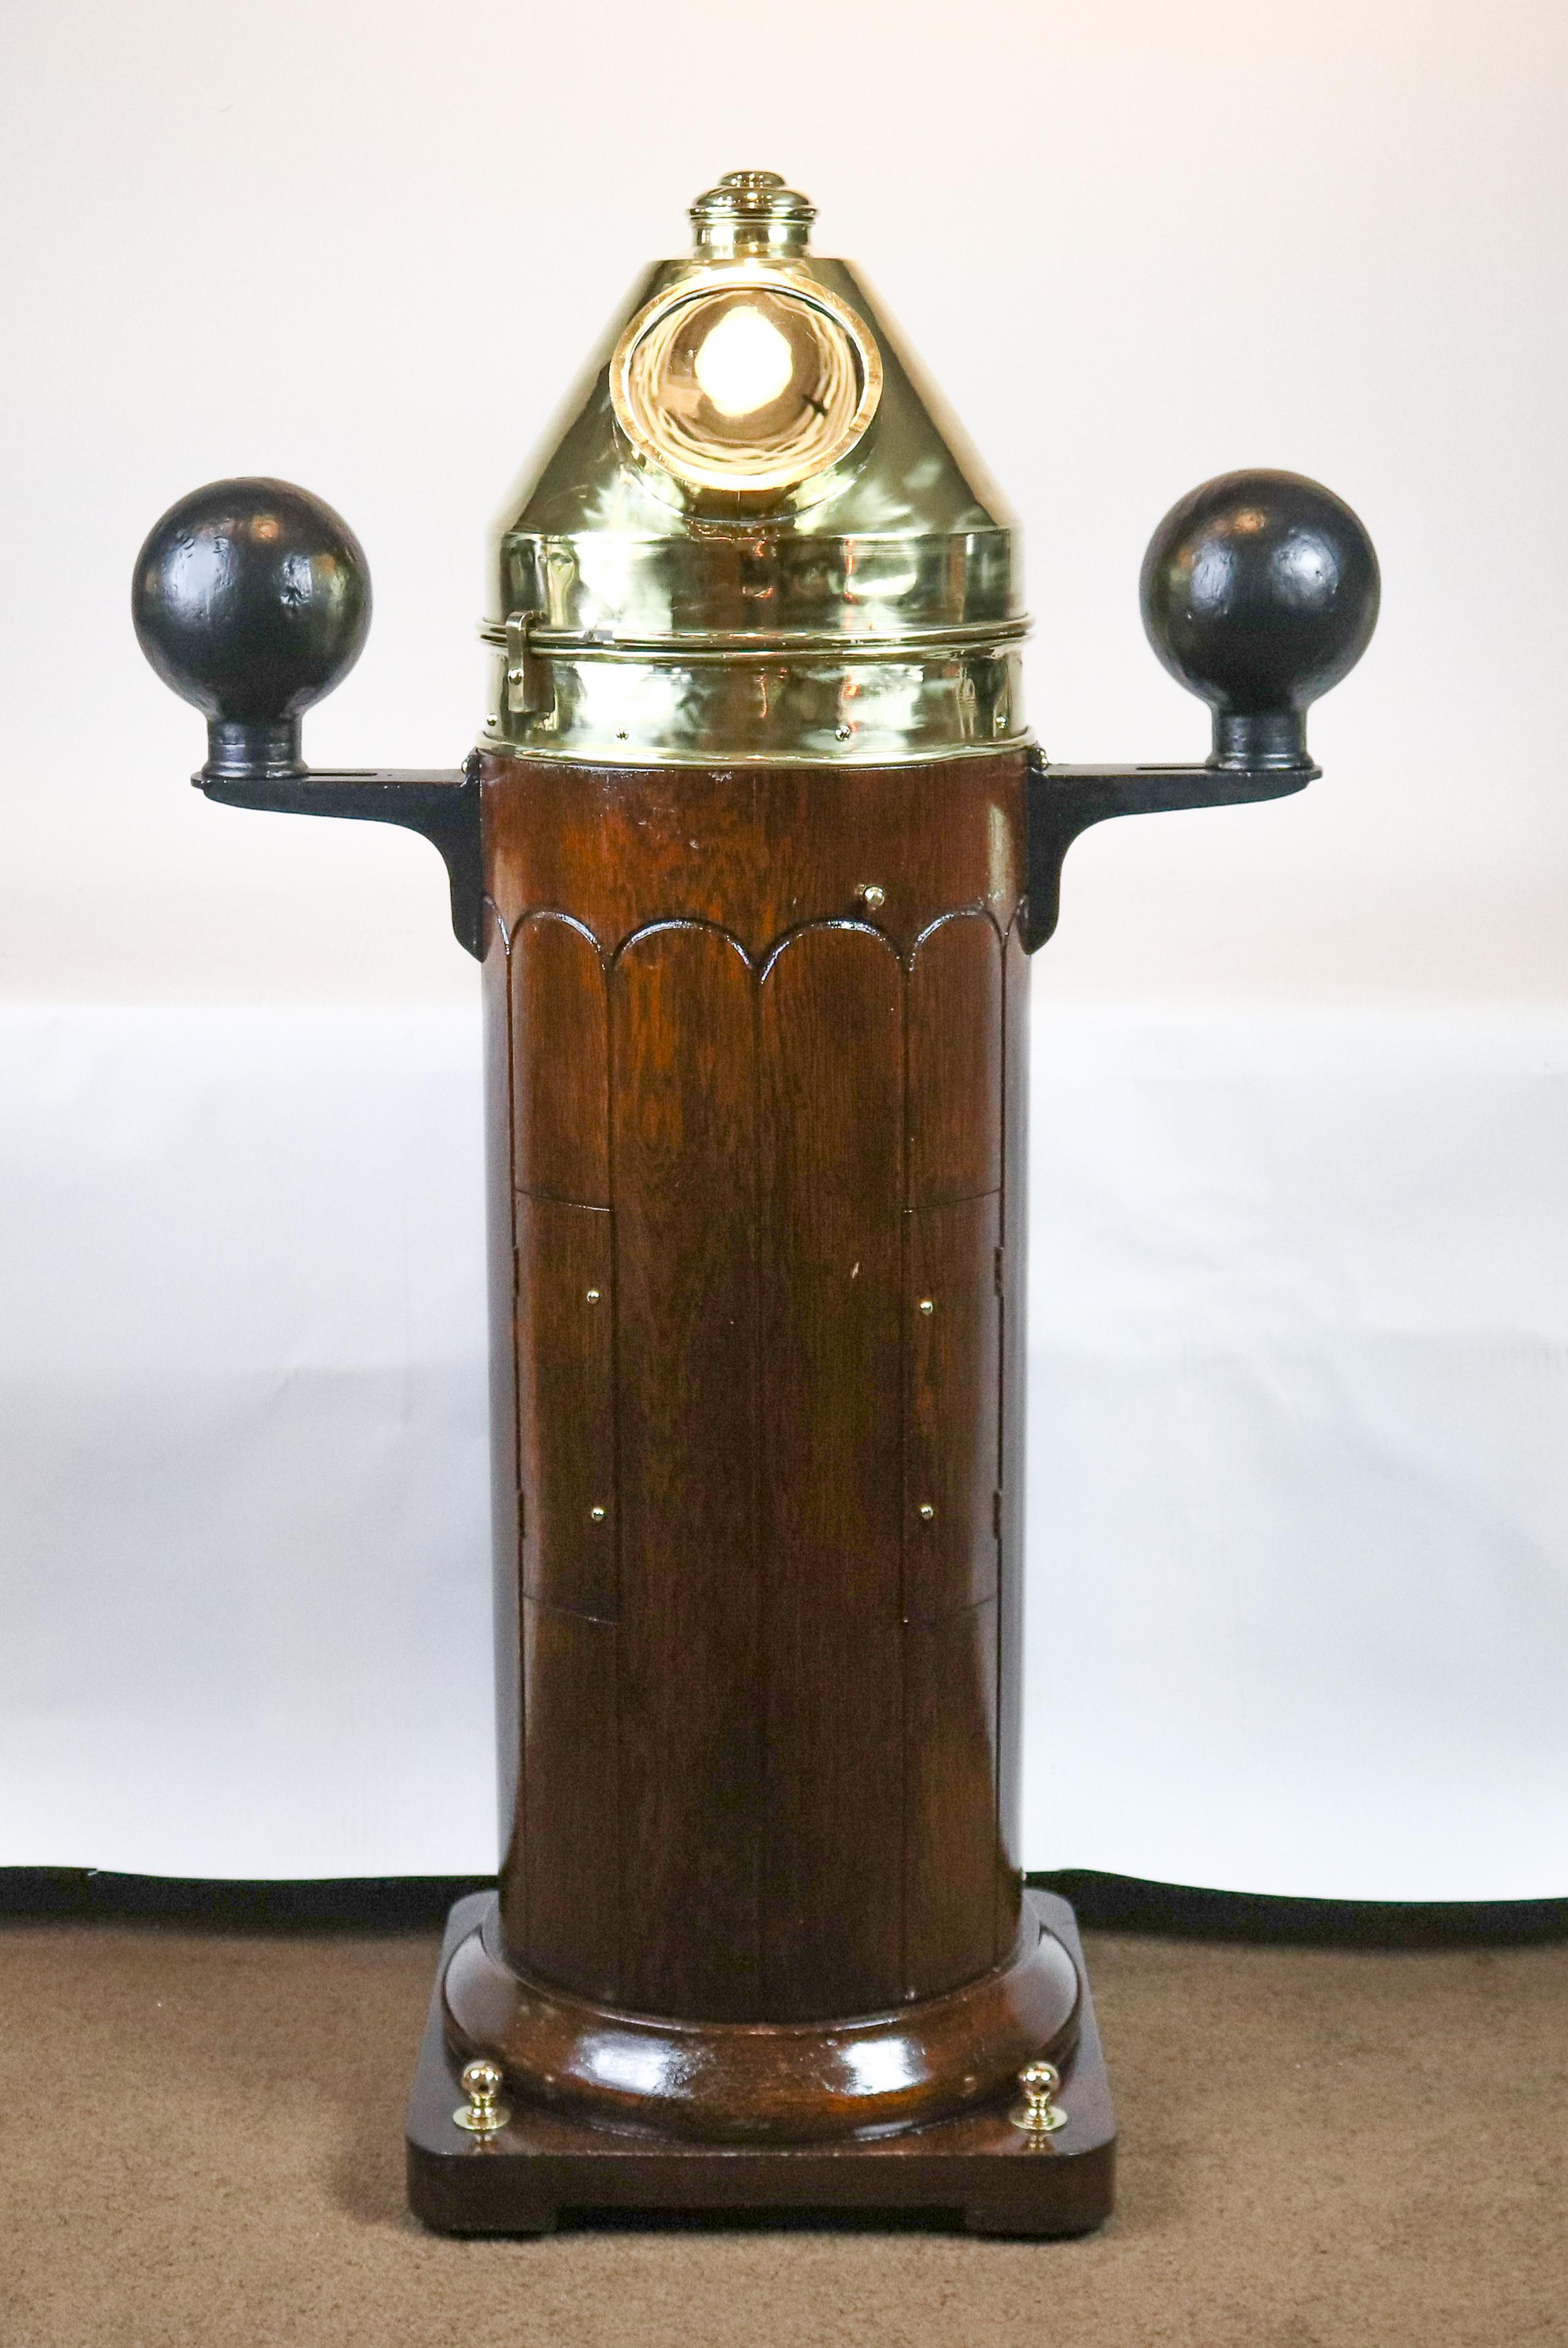 Classic American ship's binnacle wonderfully restored with gimbaled compass by Wilfrid White of Boston. Varnished base with compensating balls. Measures: 52 x 33 x 17.